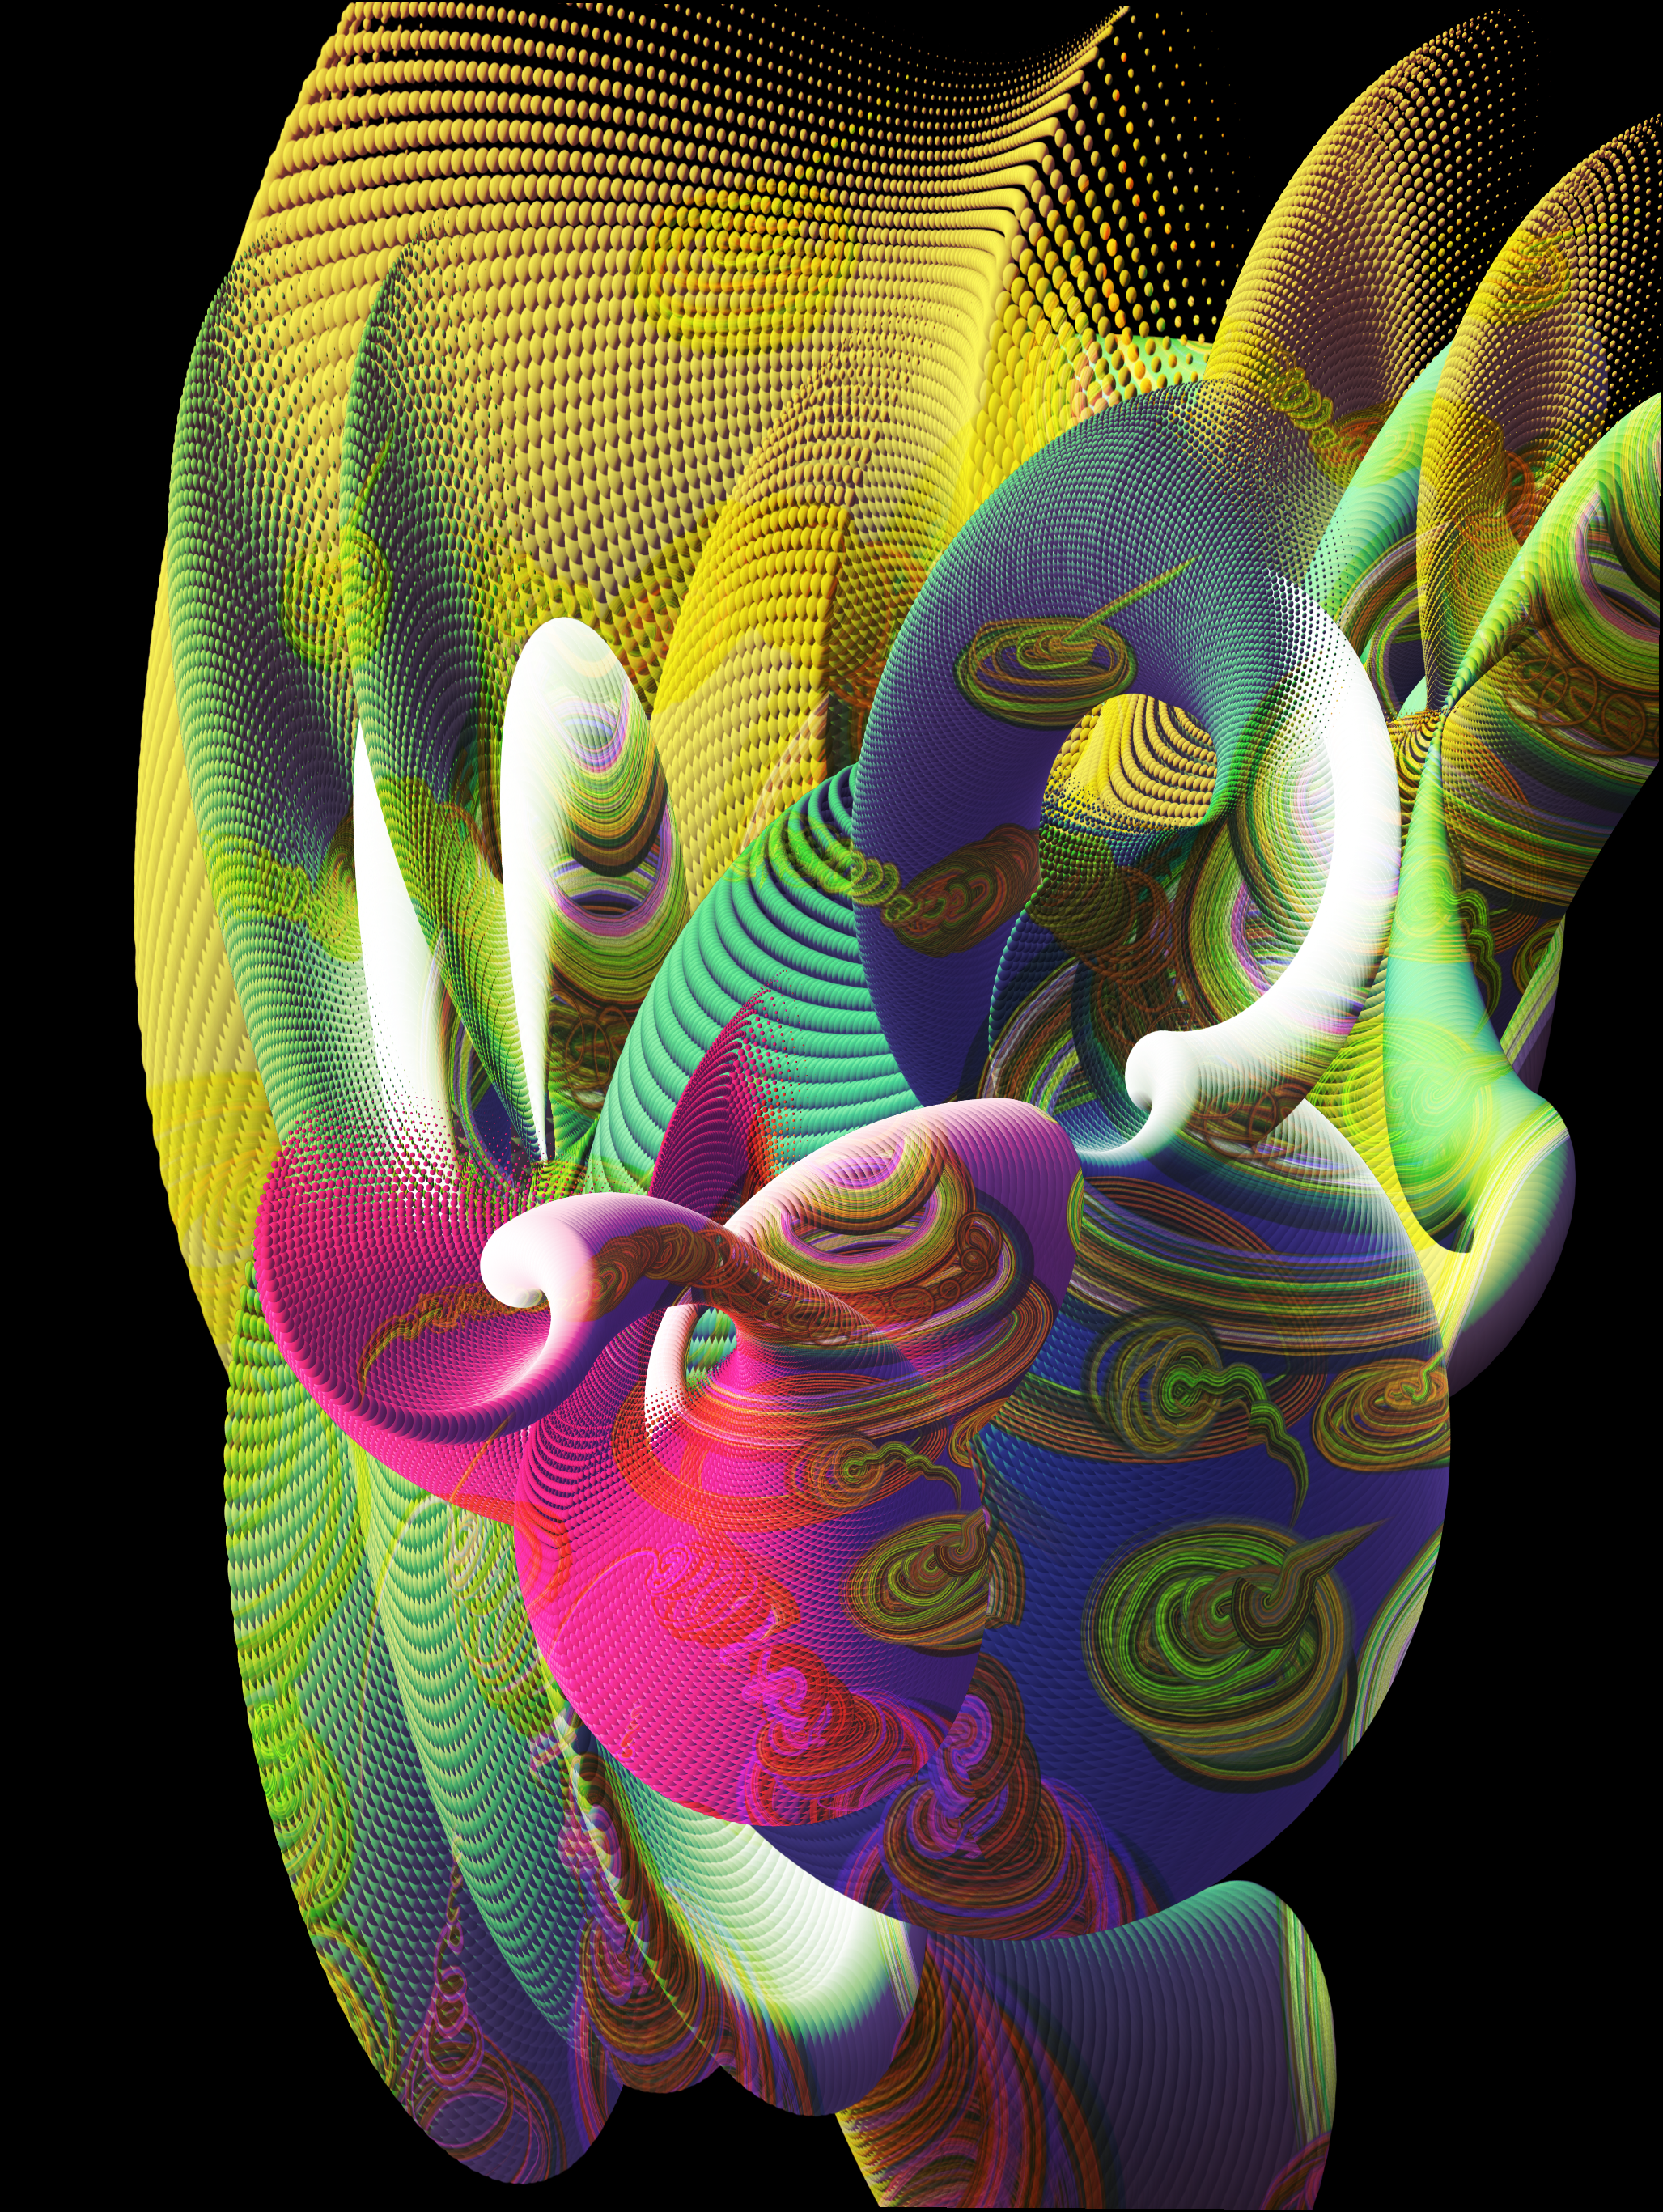 Abstract 3D image